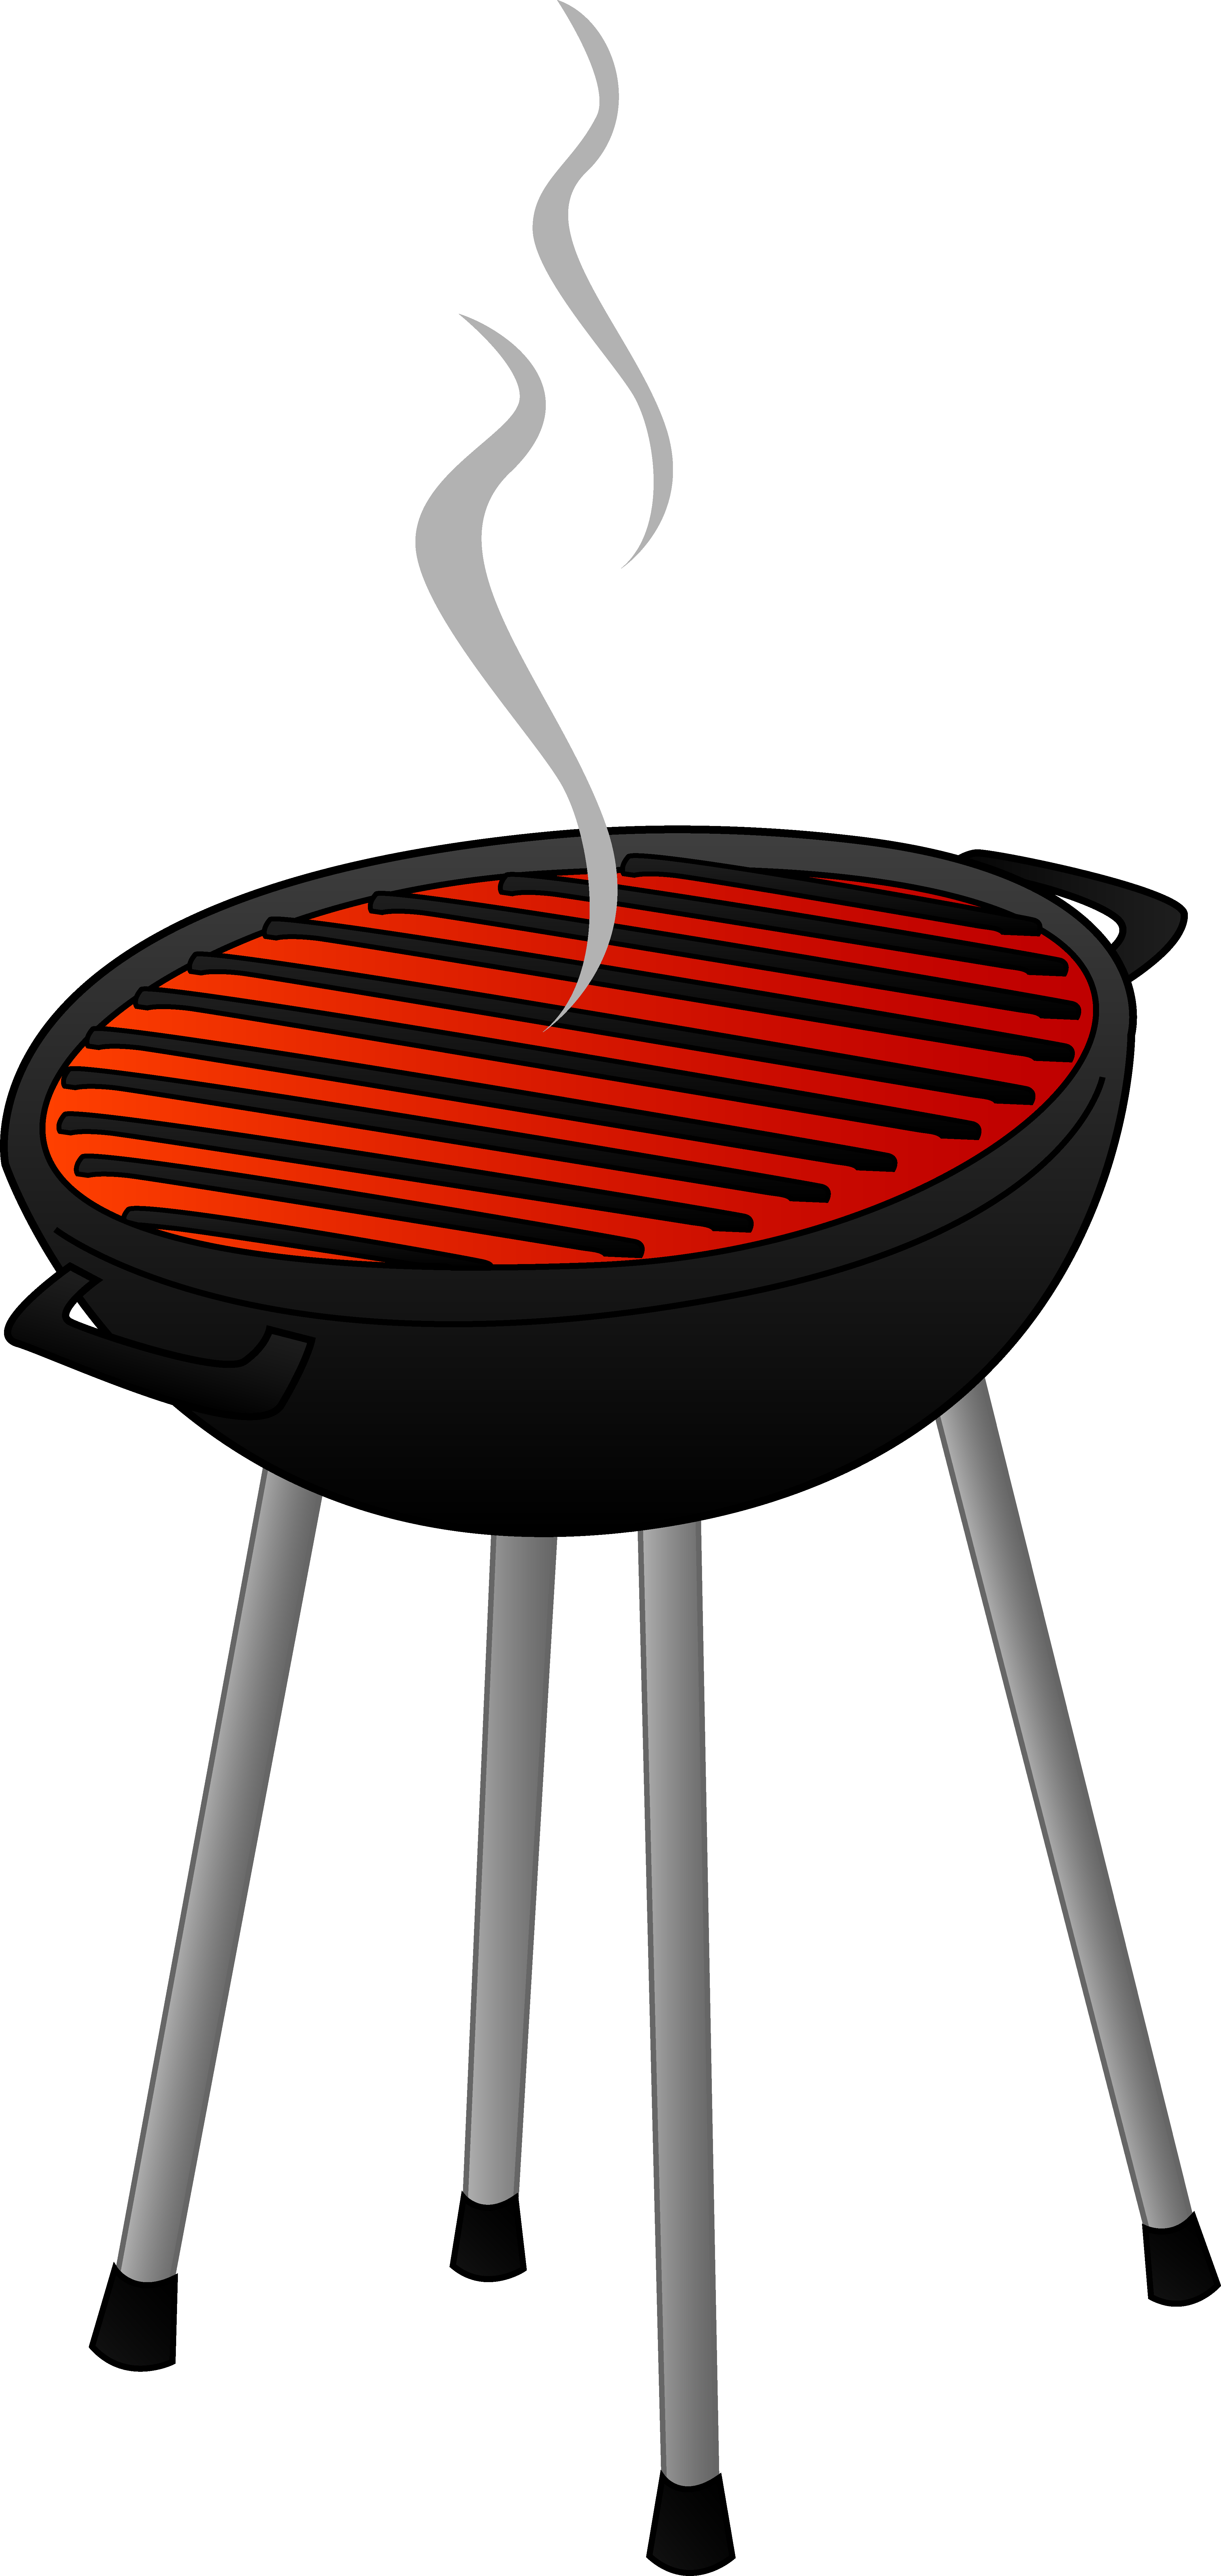 Charcoal grill clipart - Clipground